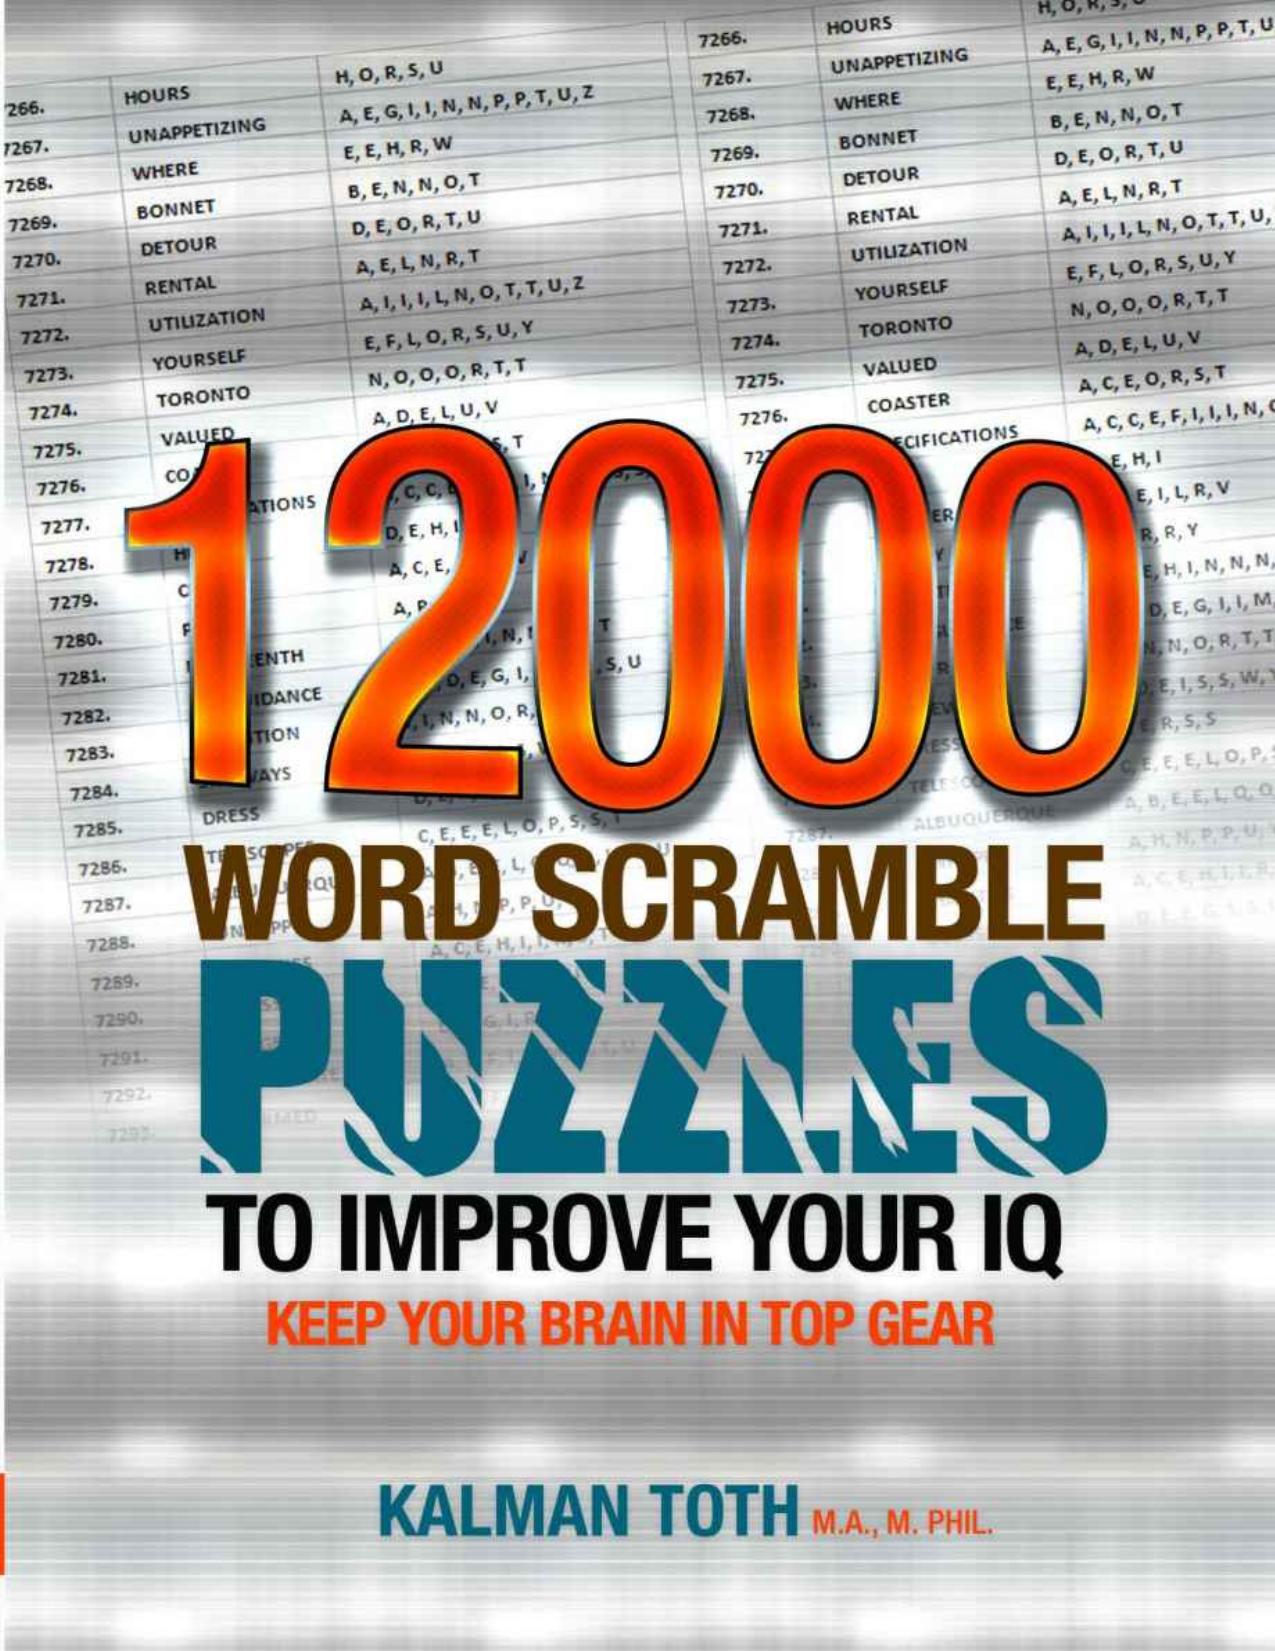 12000 Word Scramble Puzzles to Improve Your IQ by Kalman Toth M.A. M.PHIL